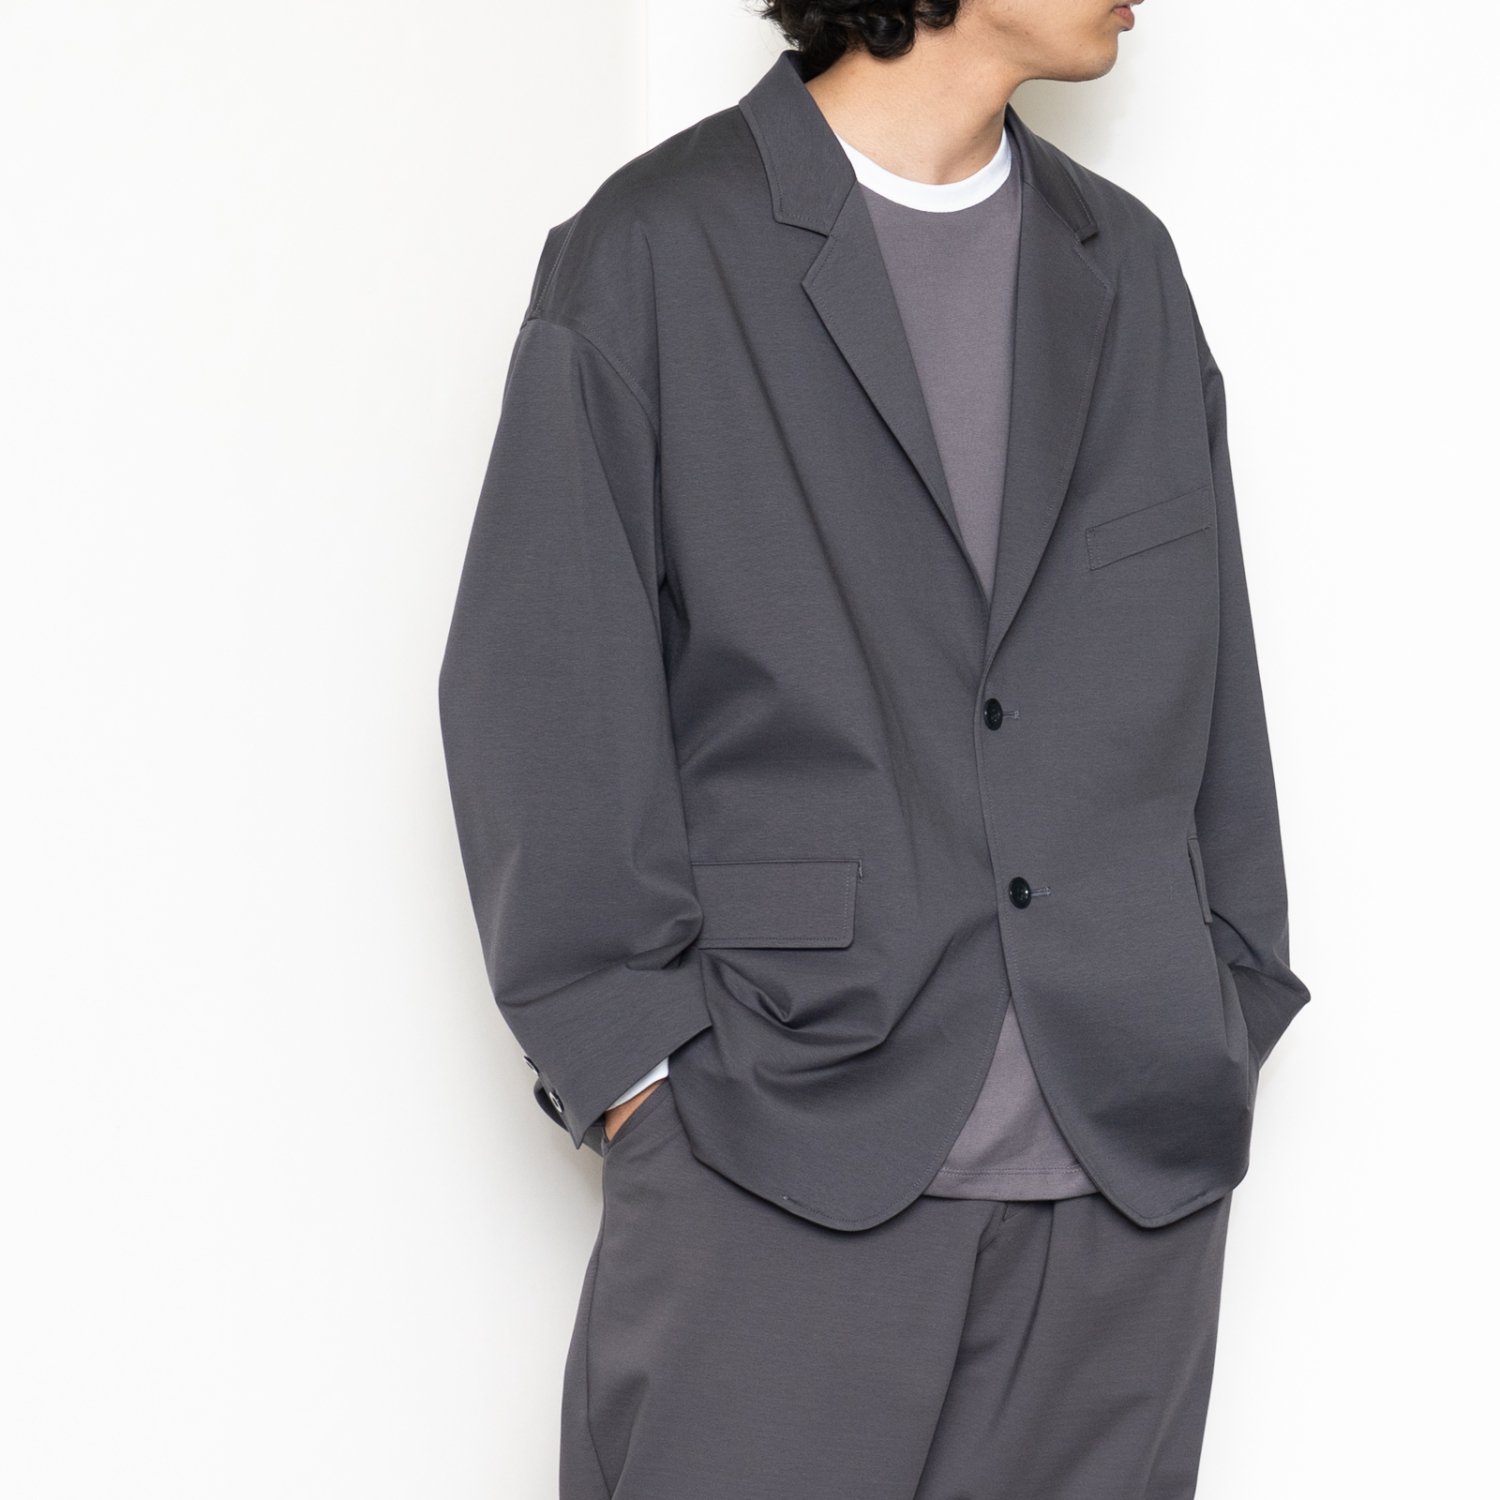 Graphpaper * Compact Ponte Jacket(2色展開)